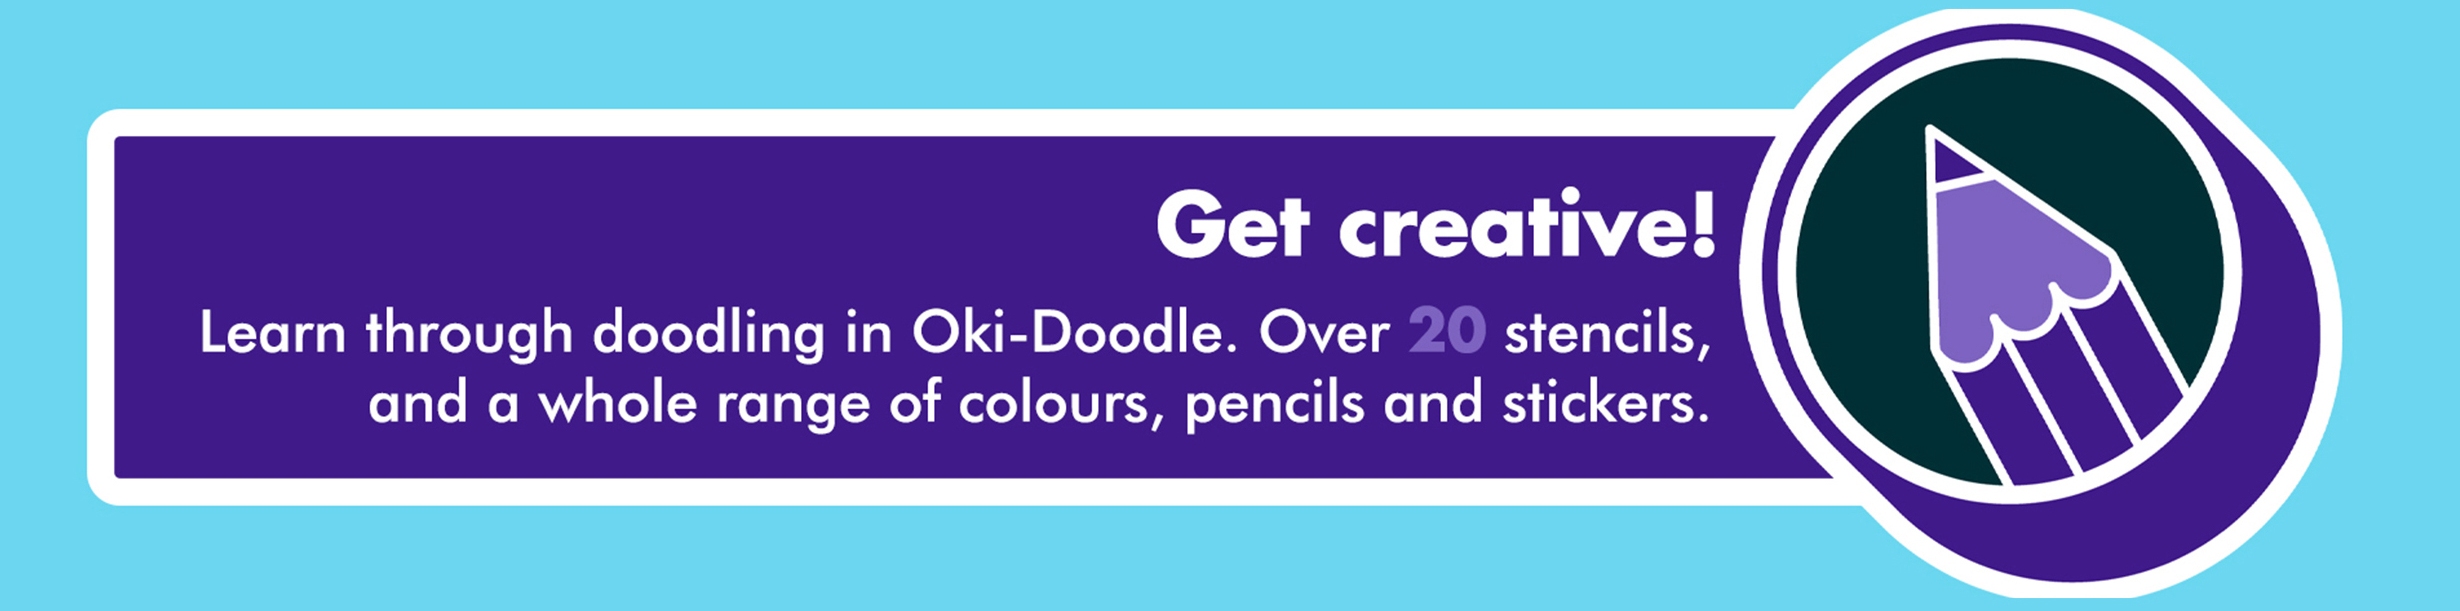 Learn through doodling in Oki-Doodle. Over 20 stencils, and a whole range of colours, pencils and stickers.